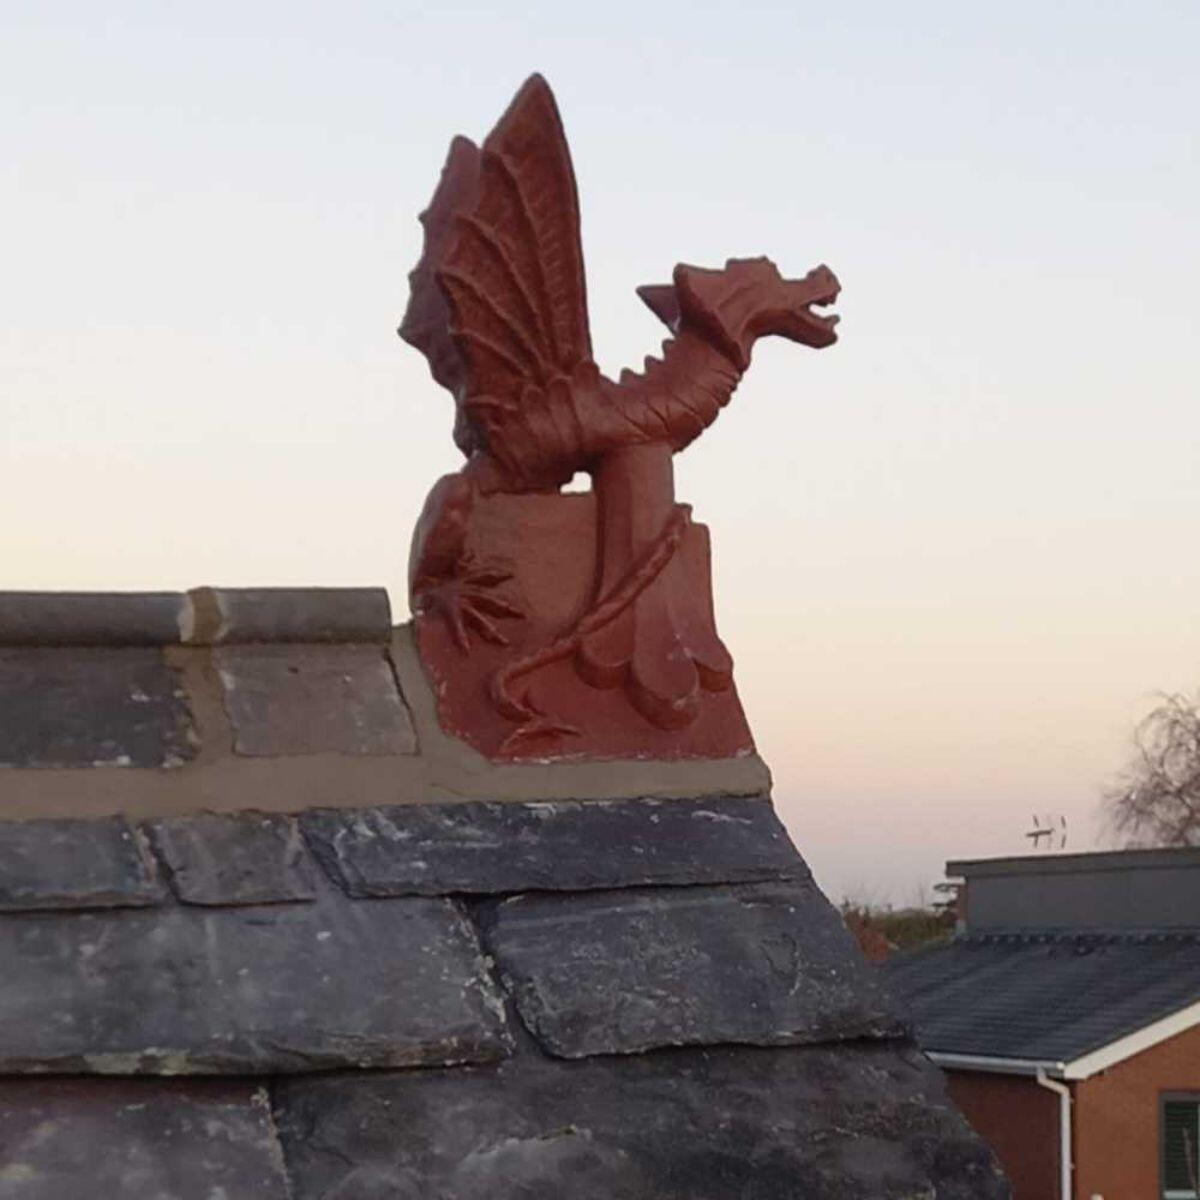 Emperor dragon finial installed on a gable roof